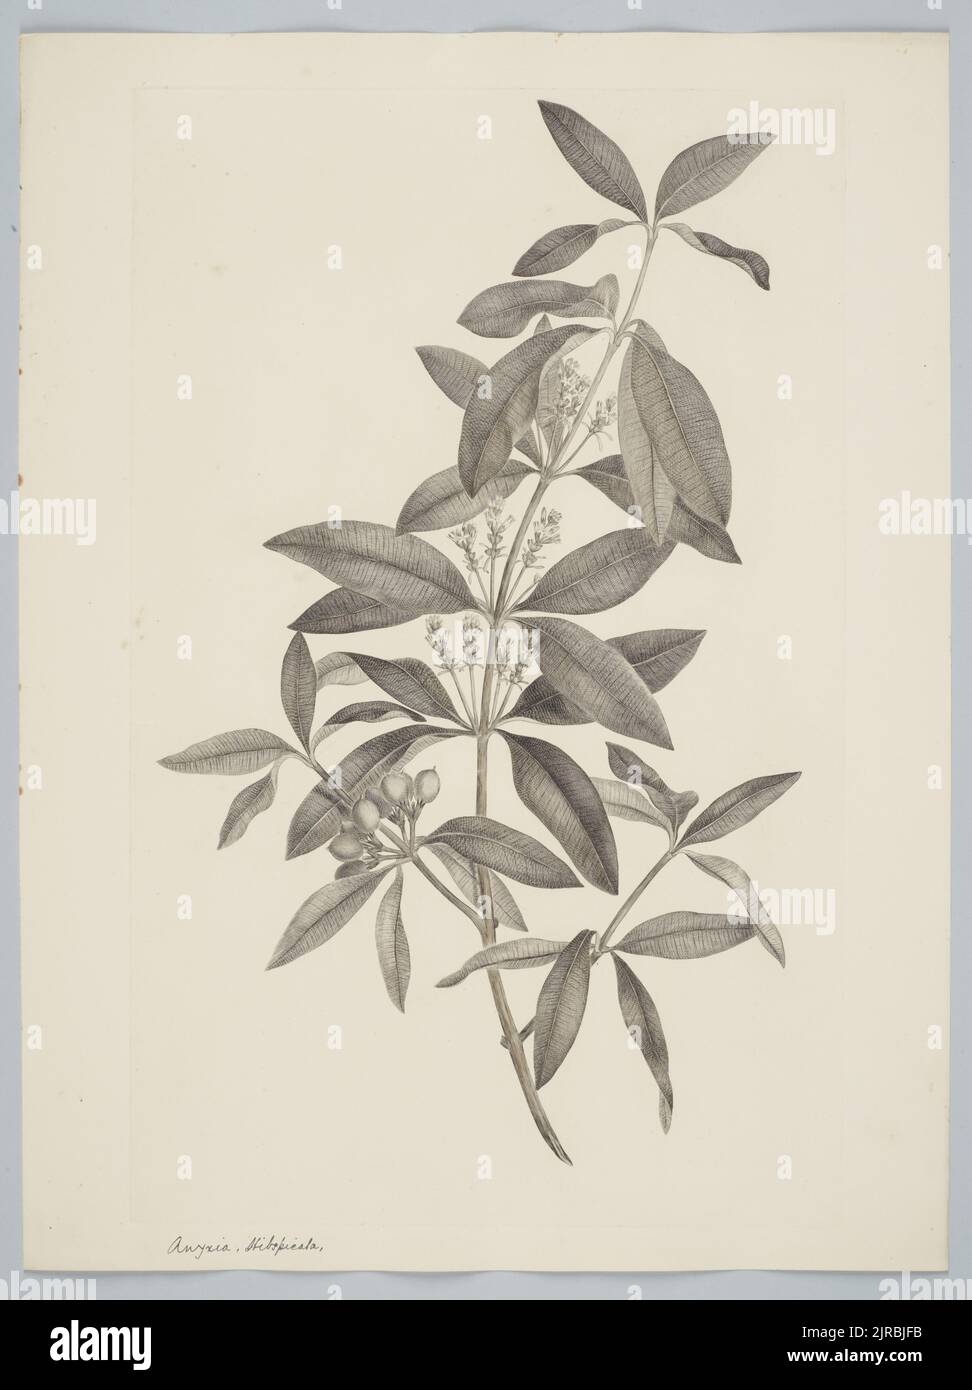 Alyxia spicata R. Brown, by Sydney Parkinson. Gift of the British Museum, 1895. Stock Photo